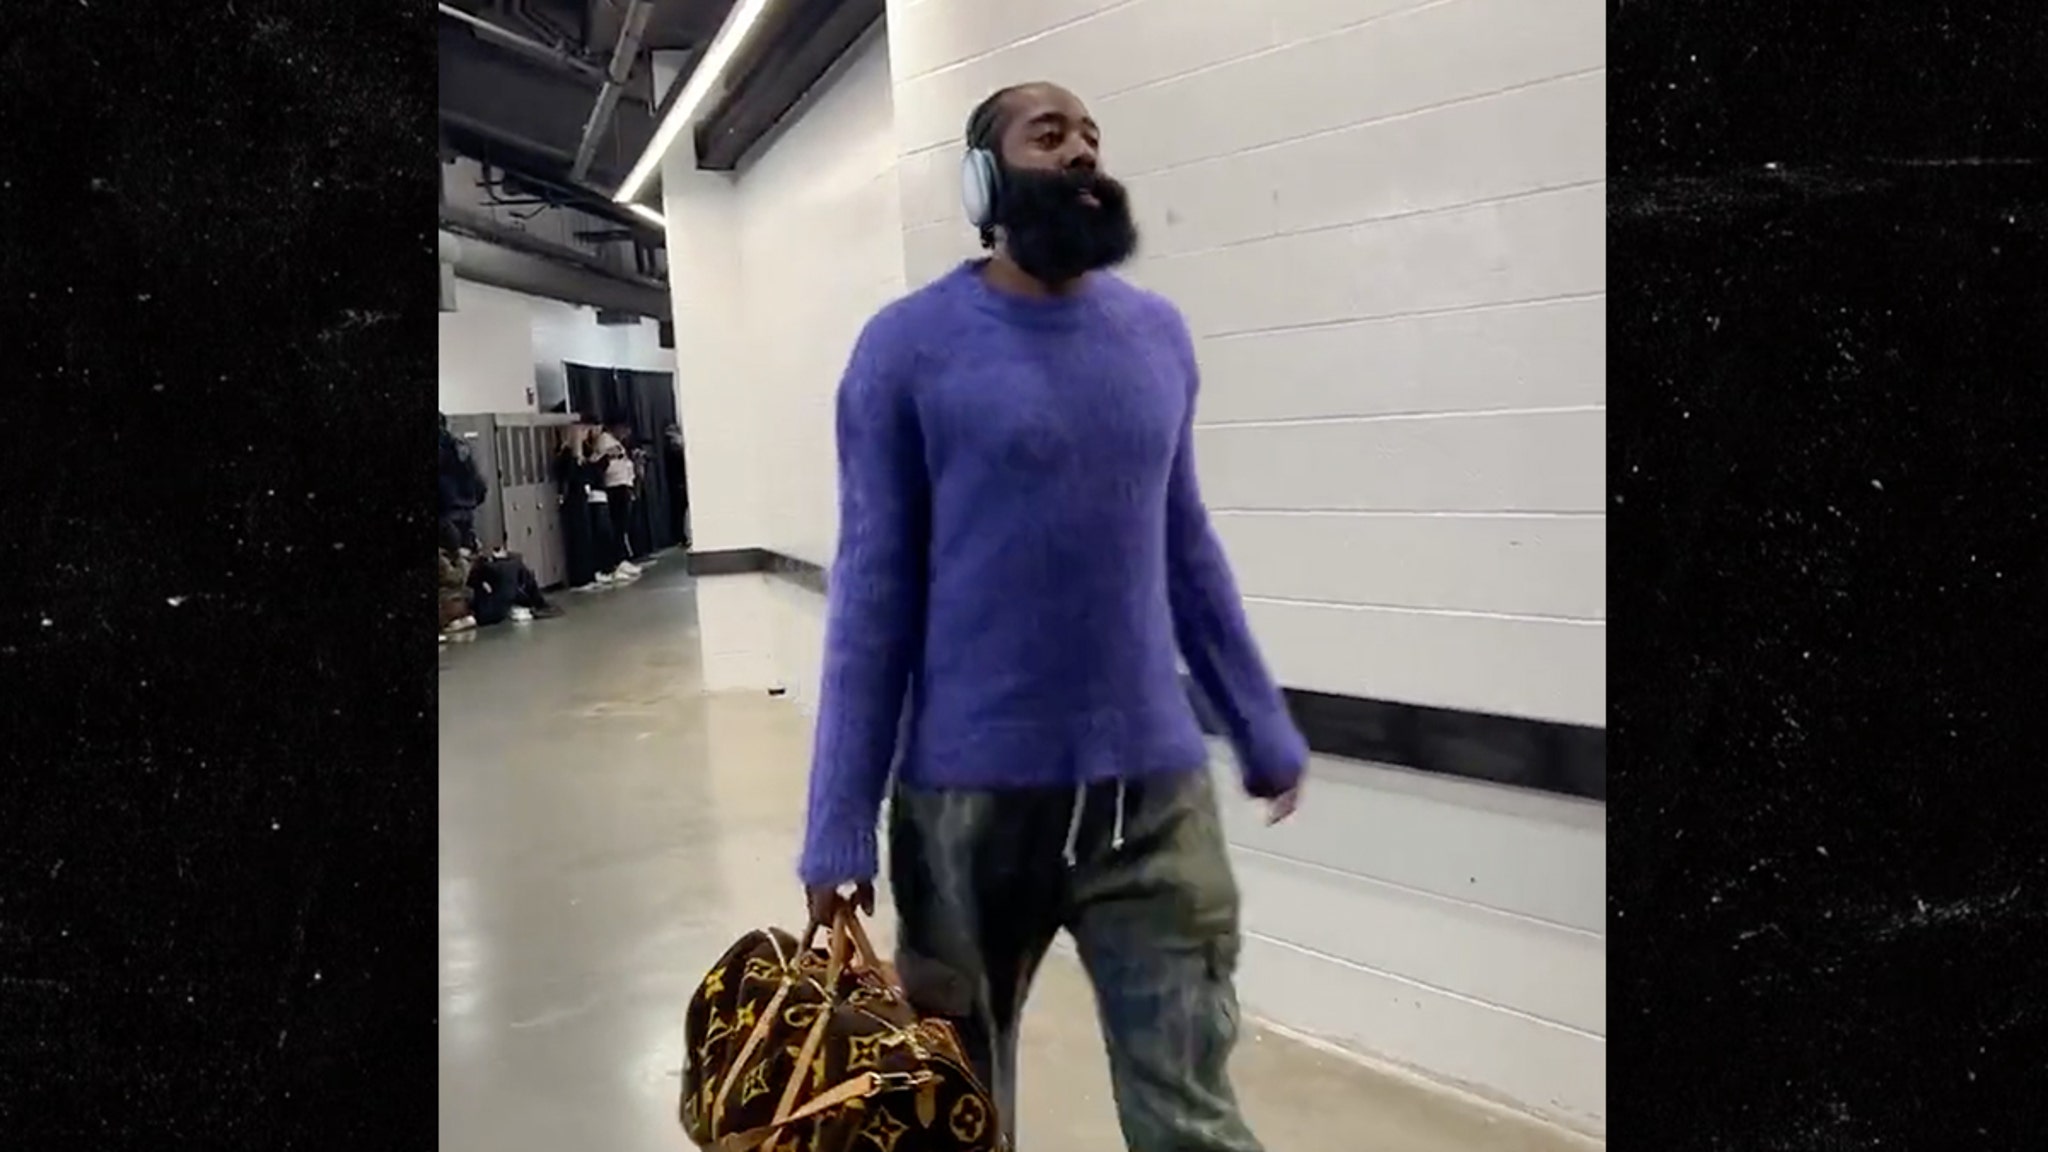 James Harden playoff outfit? A letterman jacket adorned with flamingo